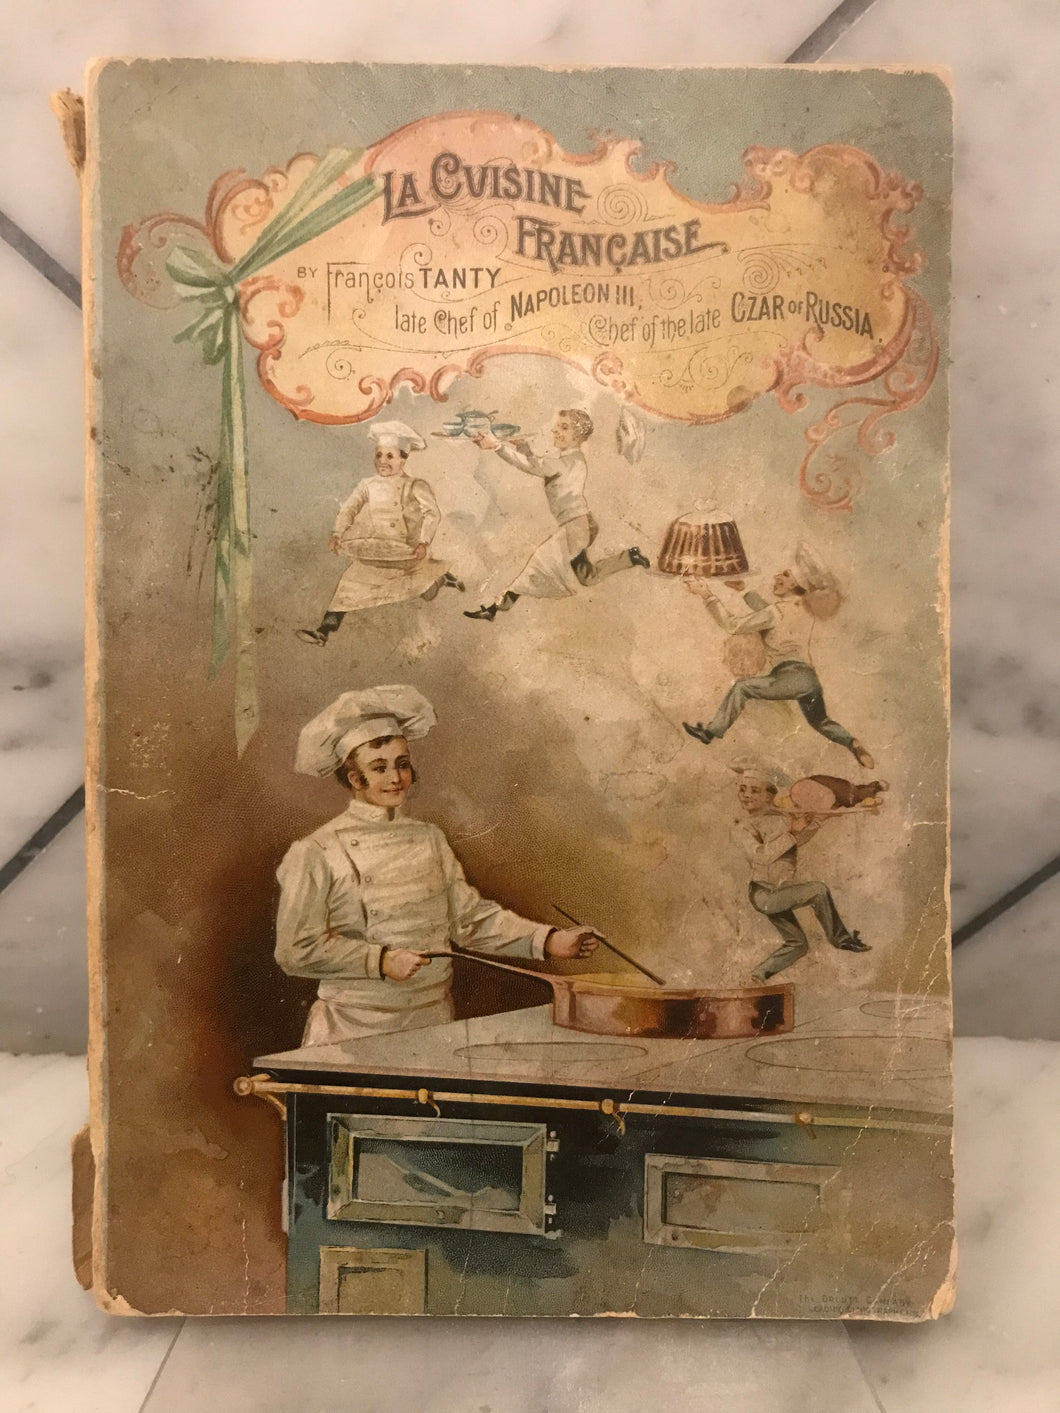 La Cuisine Francaise, By Francois Tanty, Late Chef of Napoleon III, Chef of the Late Czar of Russia